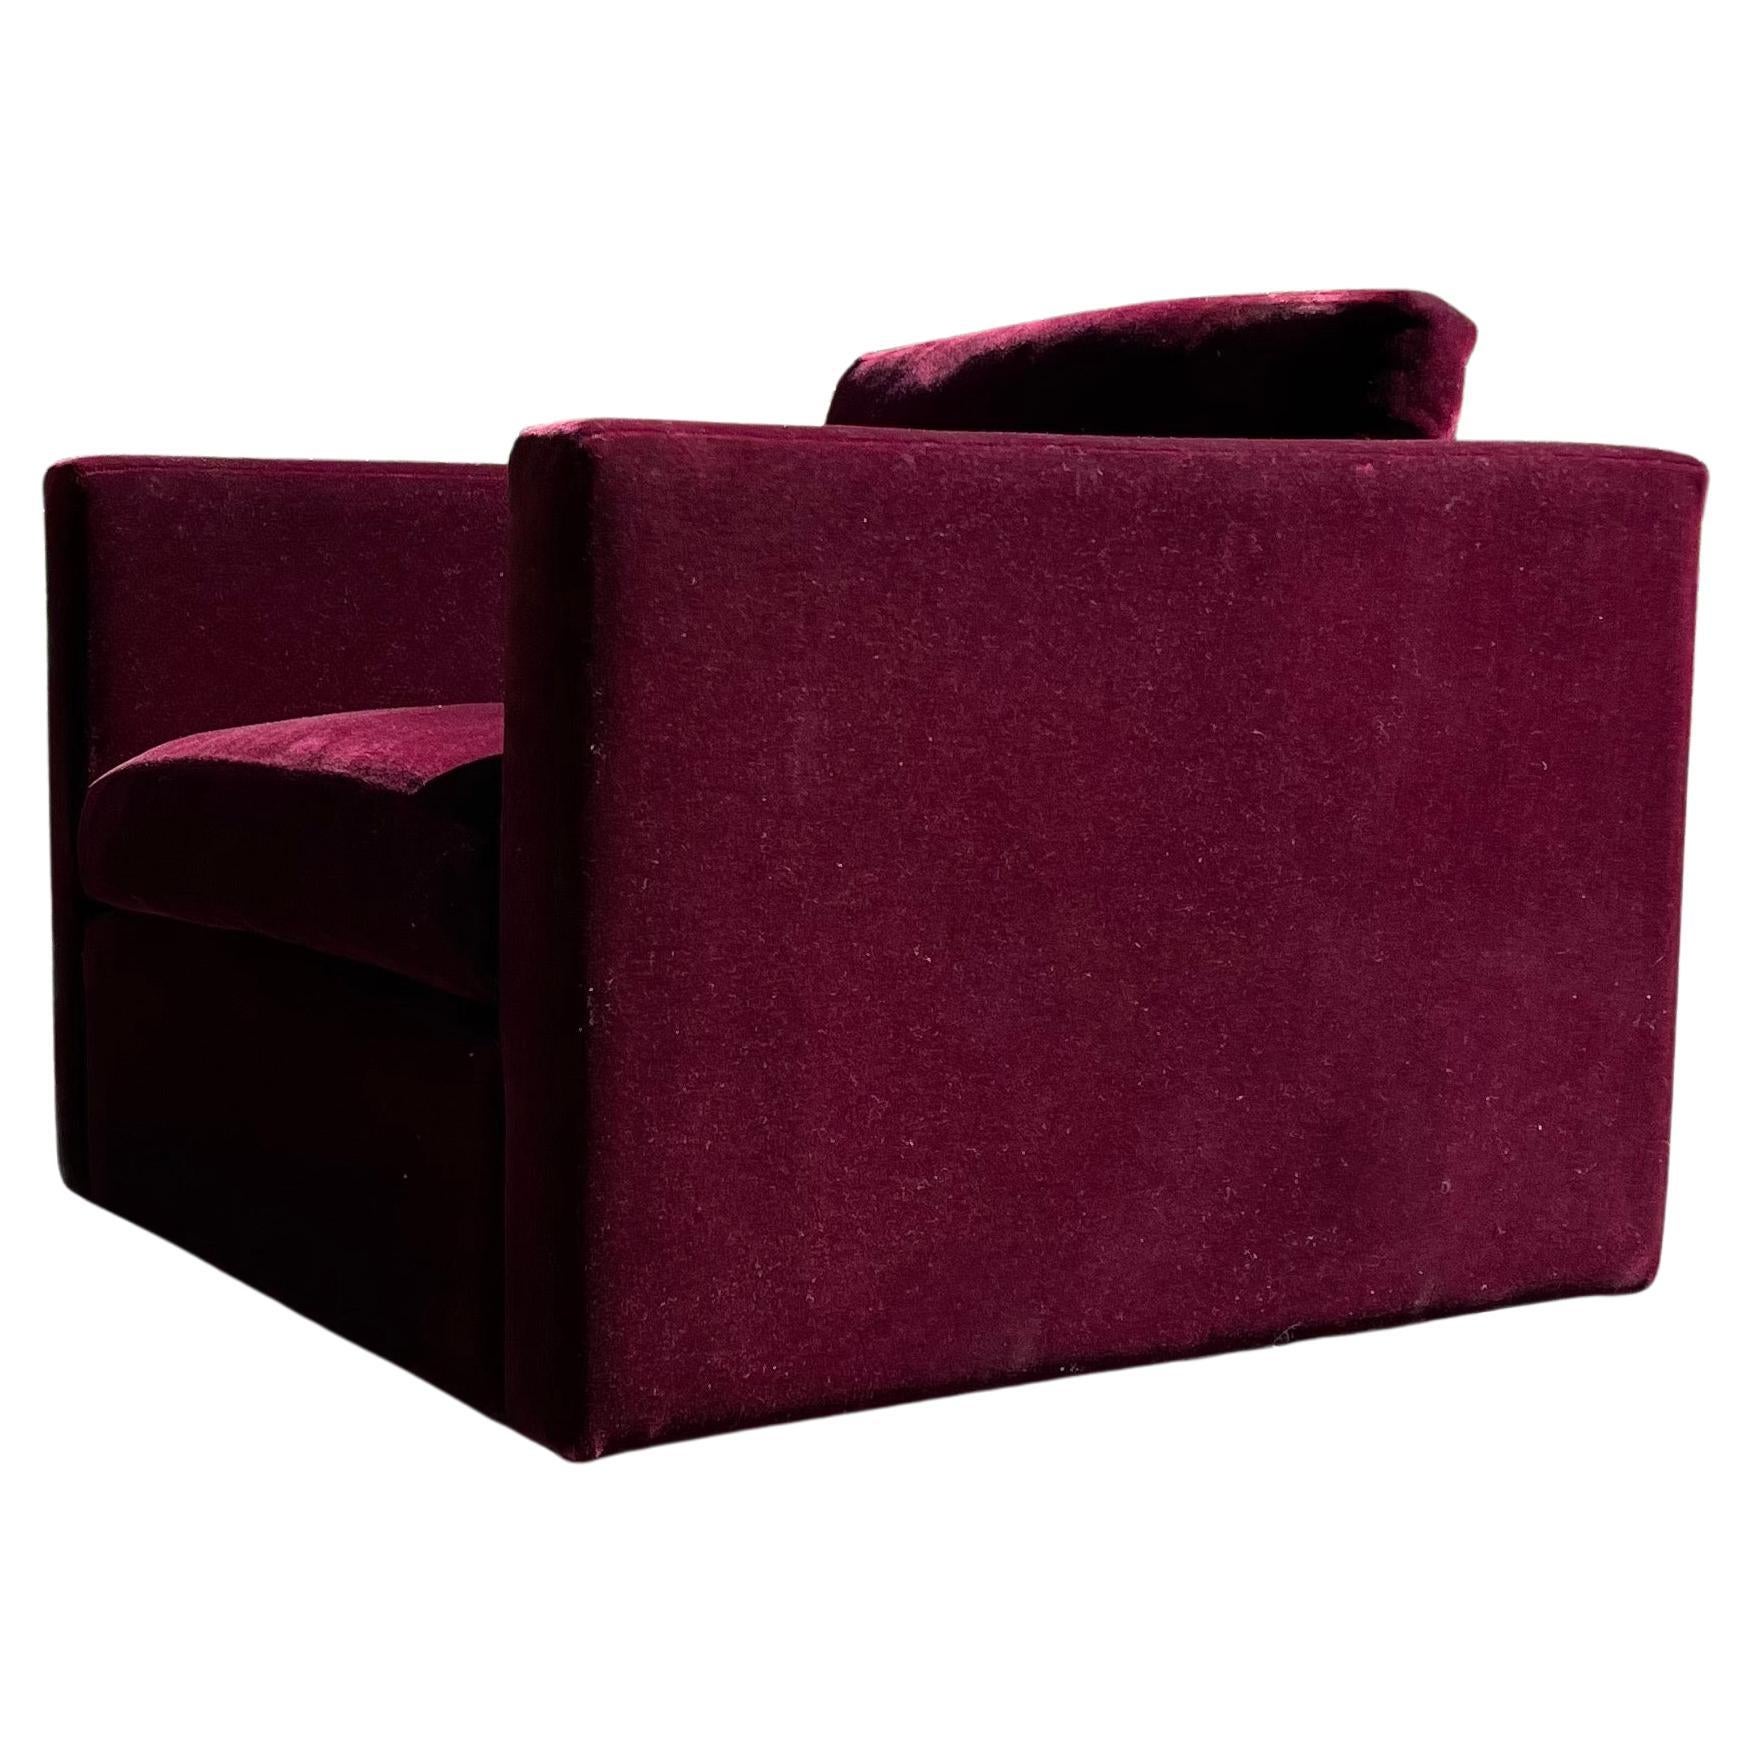 Knoll Pfister Club Chair in Red Mohair, 1970s